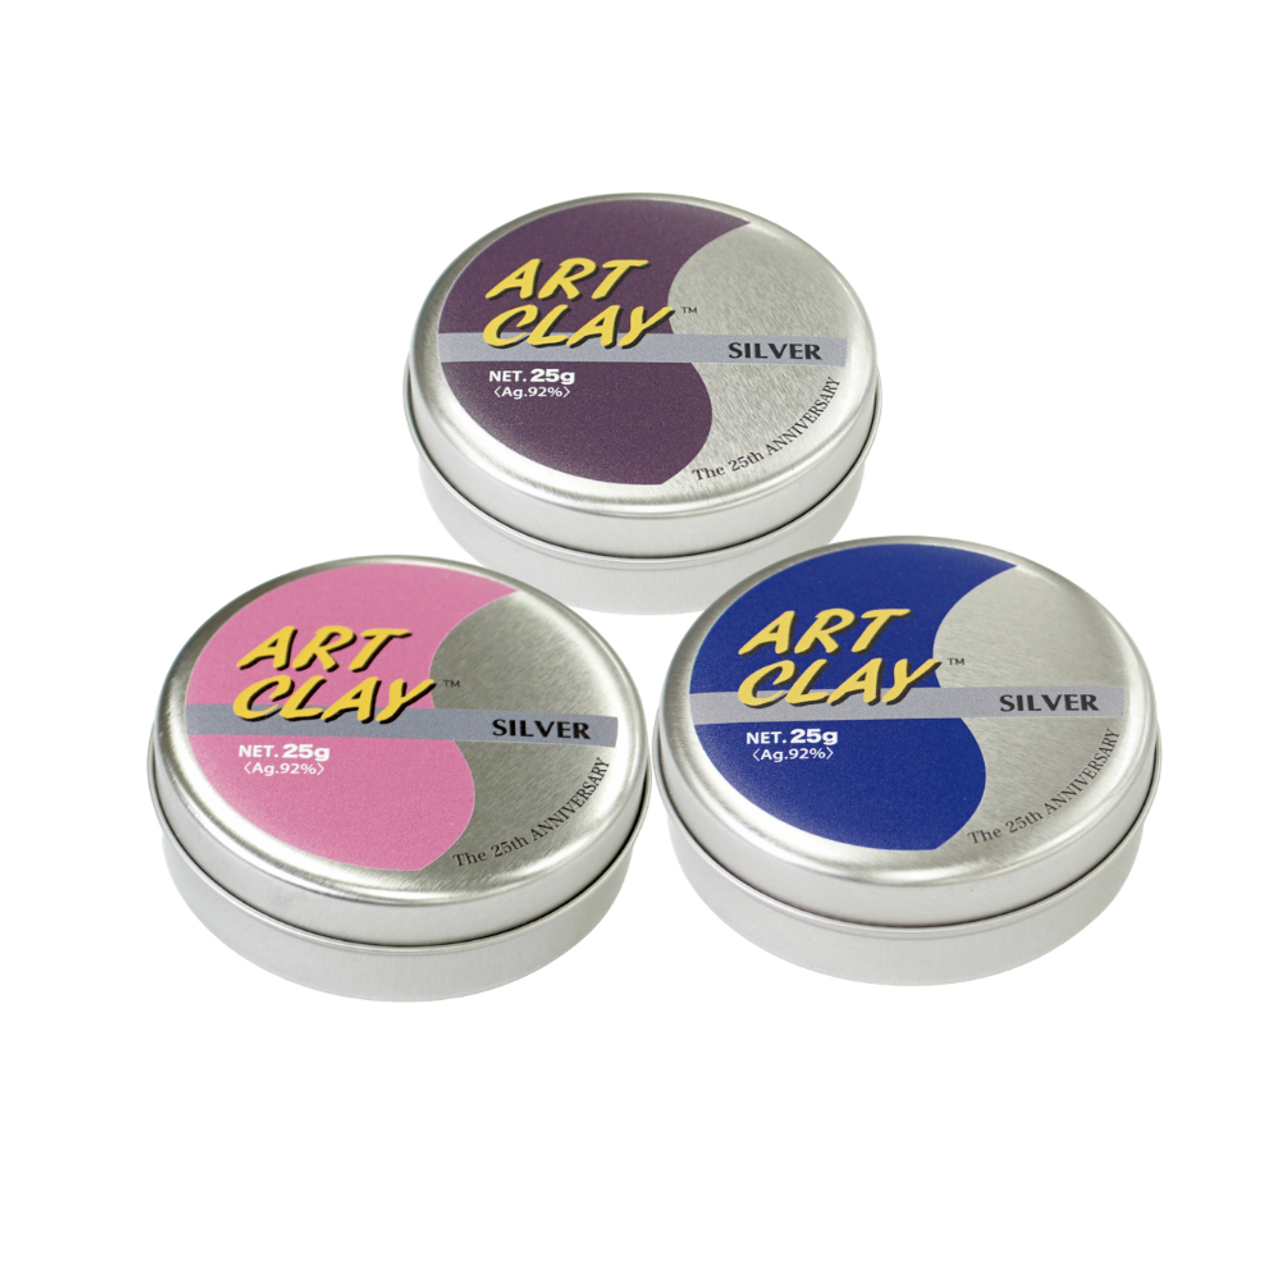 Happy 25th Anniversary Art Clay! Get your collectible limited edition tins with 25gm Art Clay Silver.